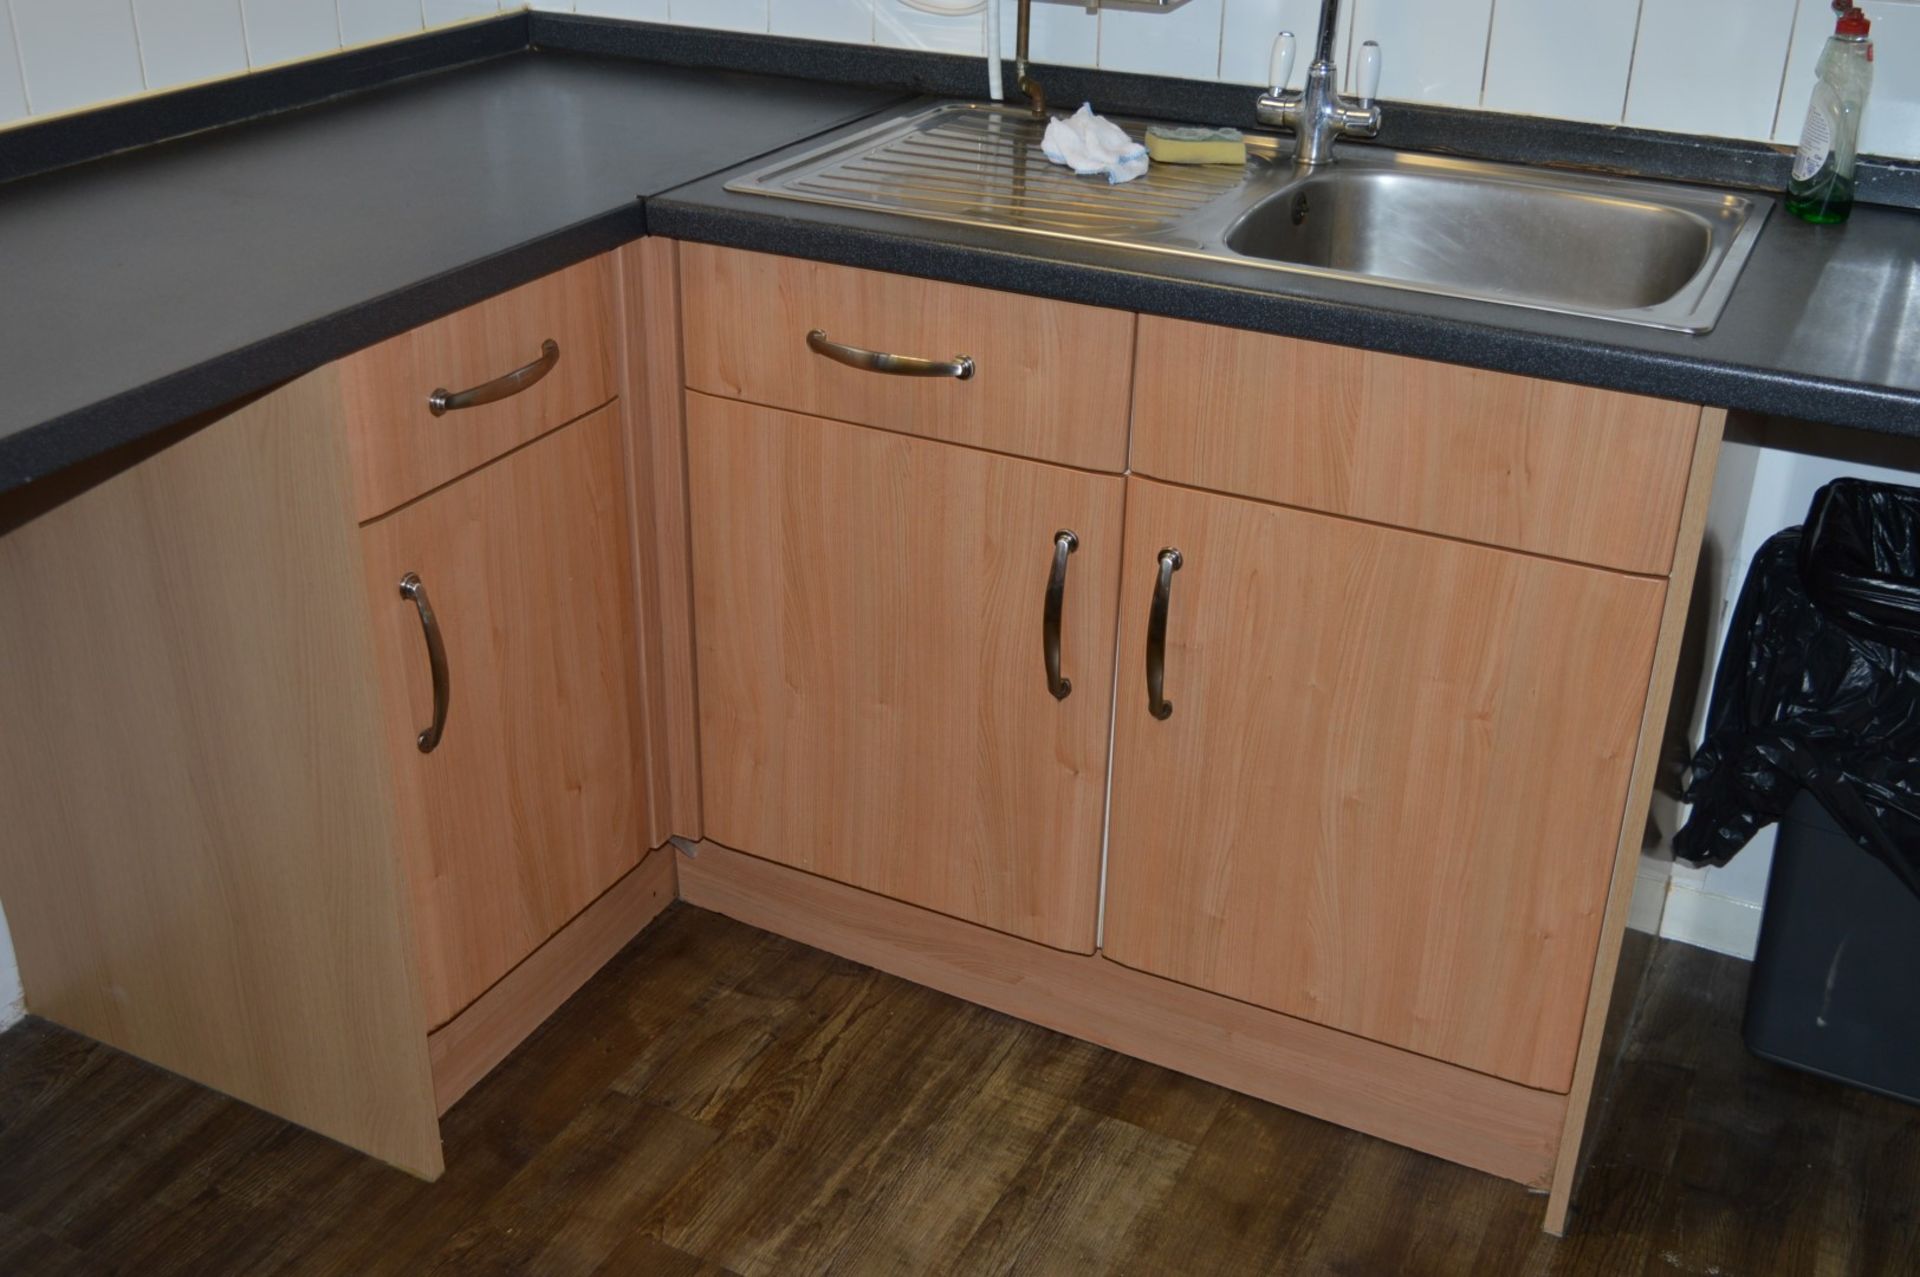 1 x Contemporary Kitchen - Includes Selection of Carcasses With Beech Doors, Chrome Handles, Black - Image 2 of 10